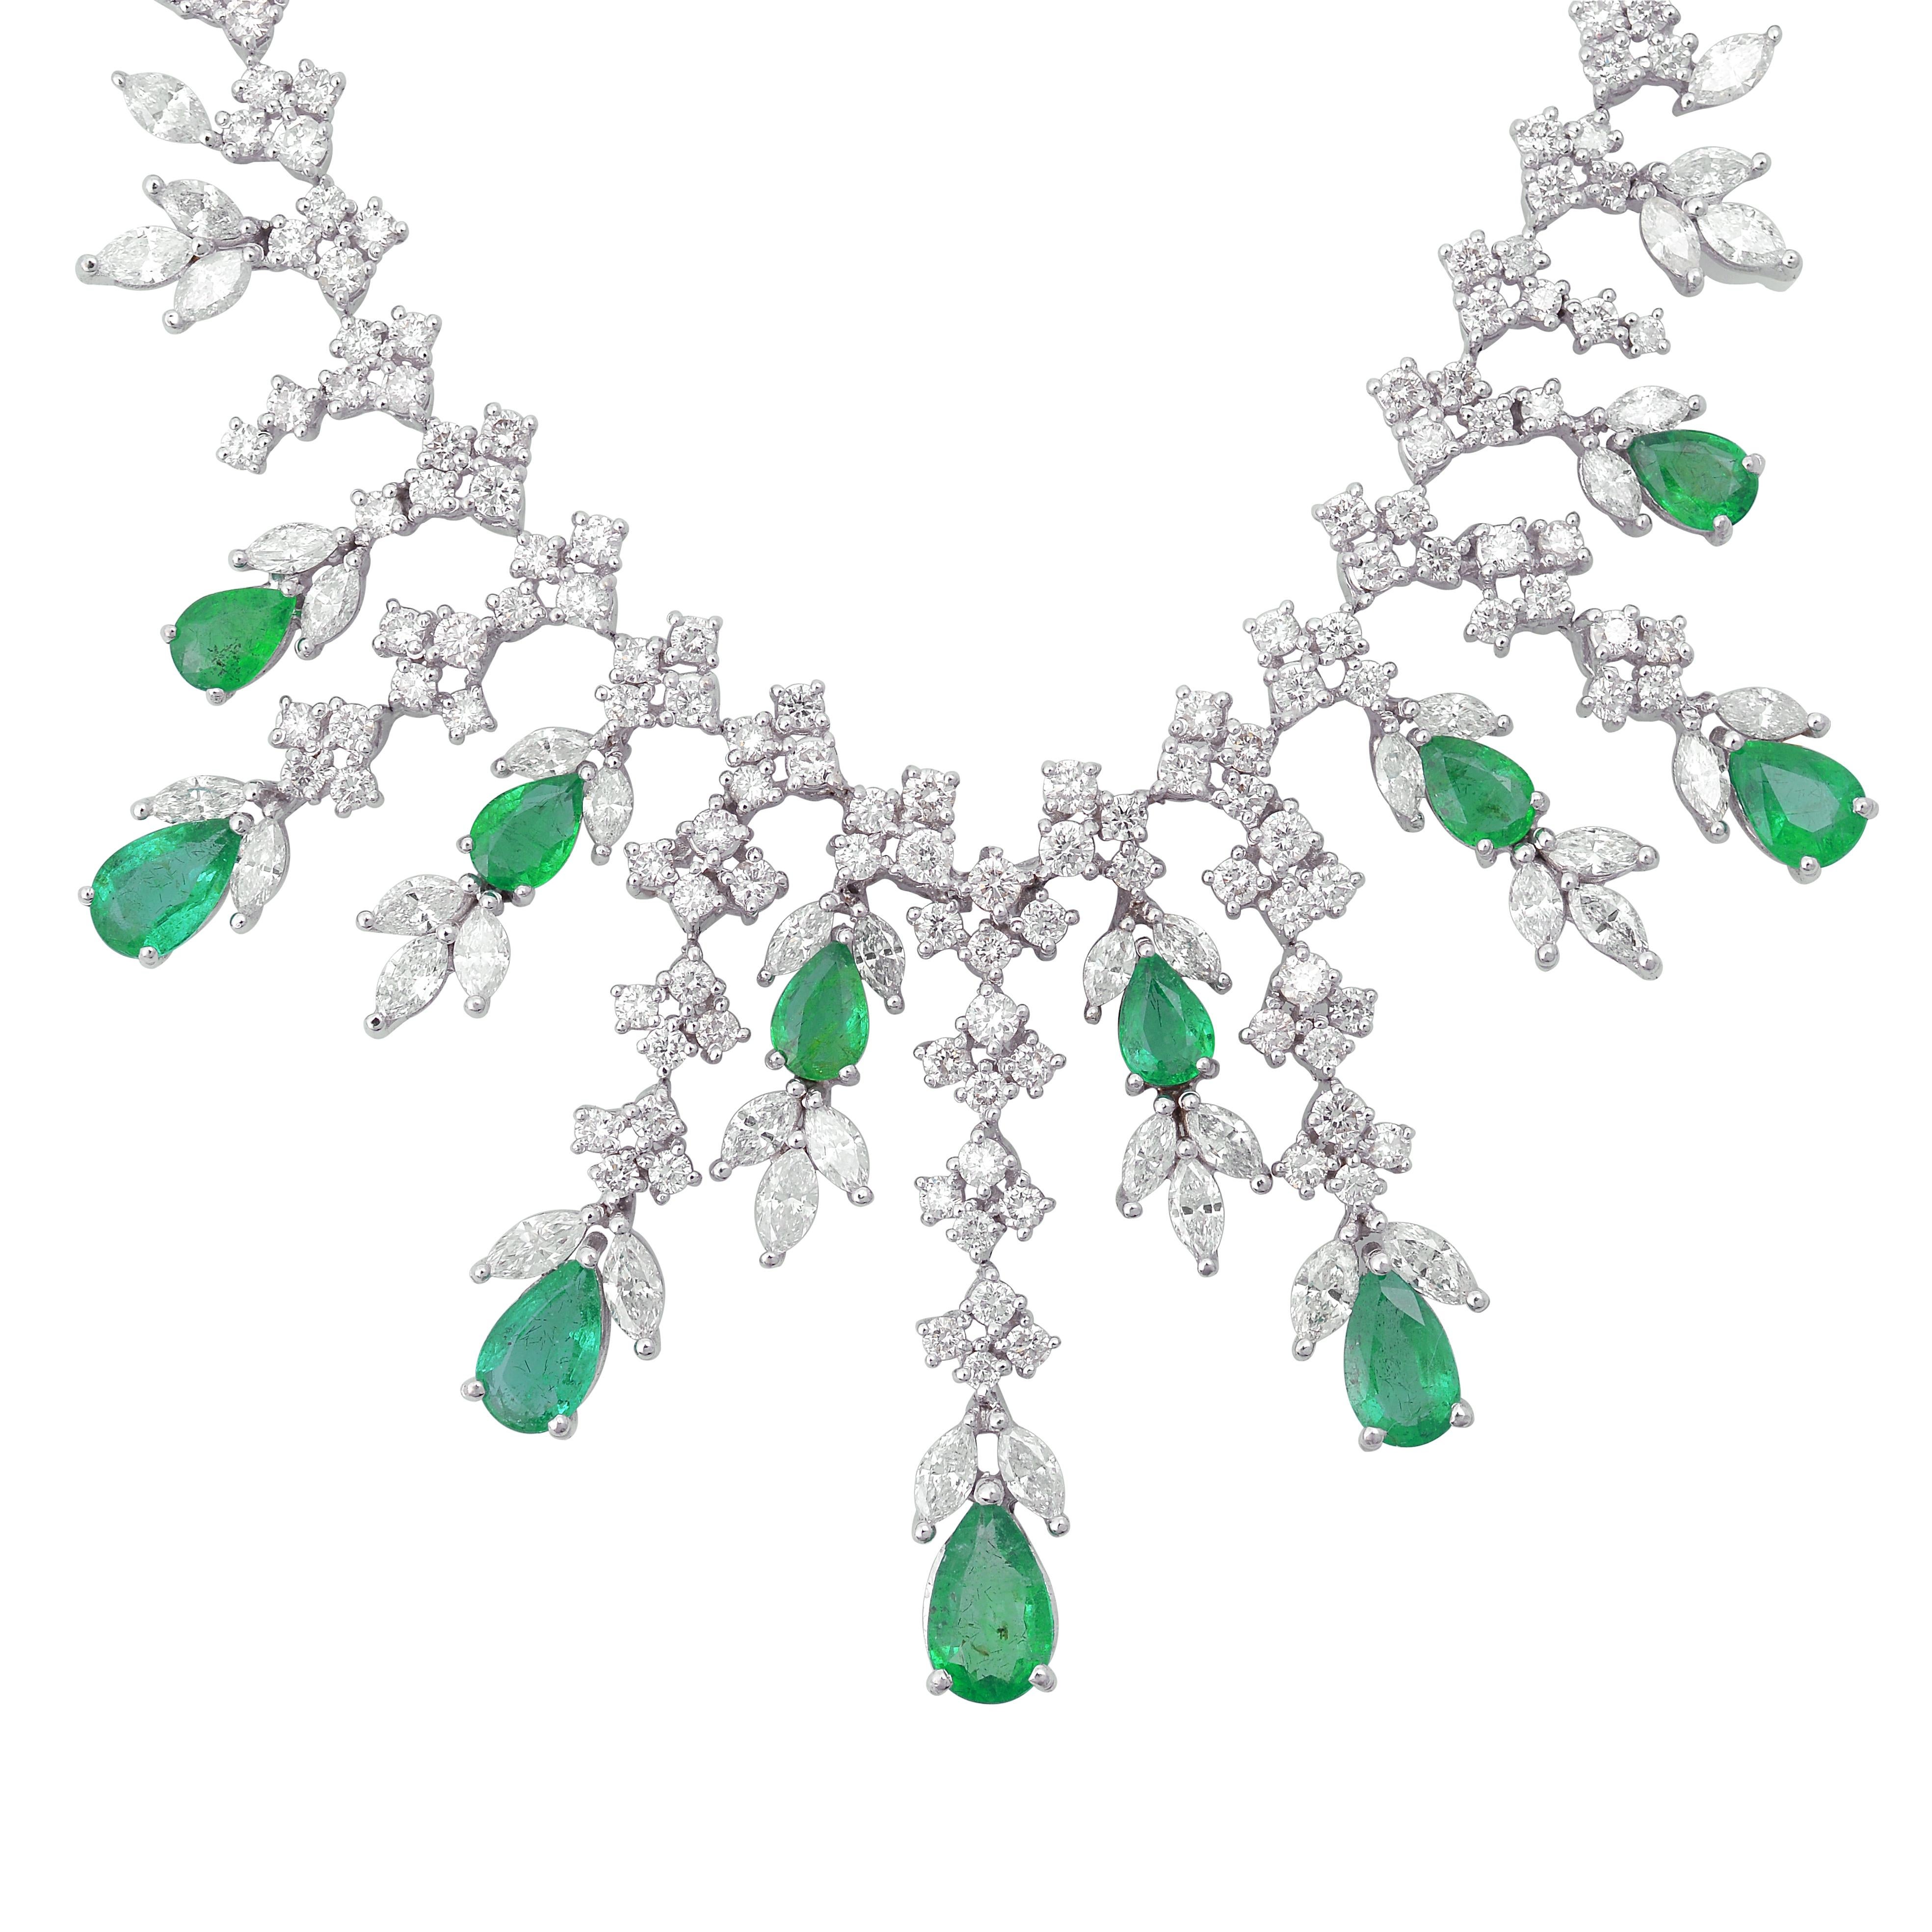 This Pear Shape Emerald Gemstone Necklace Diamond is a true statement piece, suitable for any occasion. Whether worn as a dazzling complement to an evening gown or as a luxurious accent to elevate your everyday style, it is sure to captivate